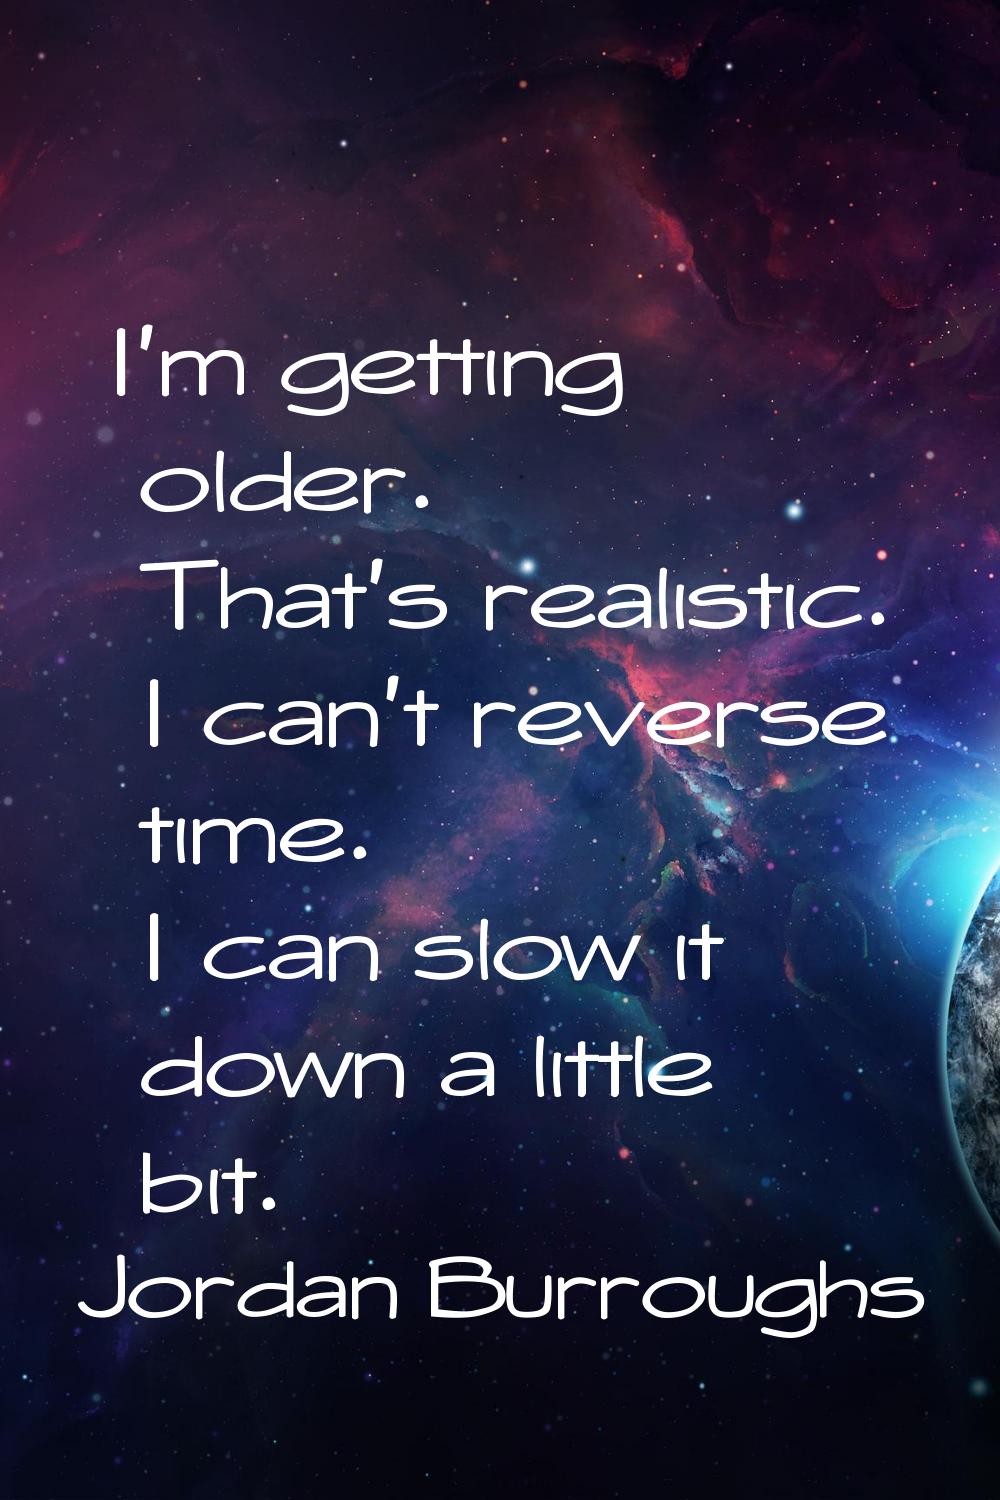 I'm getting older. That's realistic. I can't reverse time. I can slow it down a little bit.